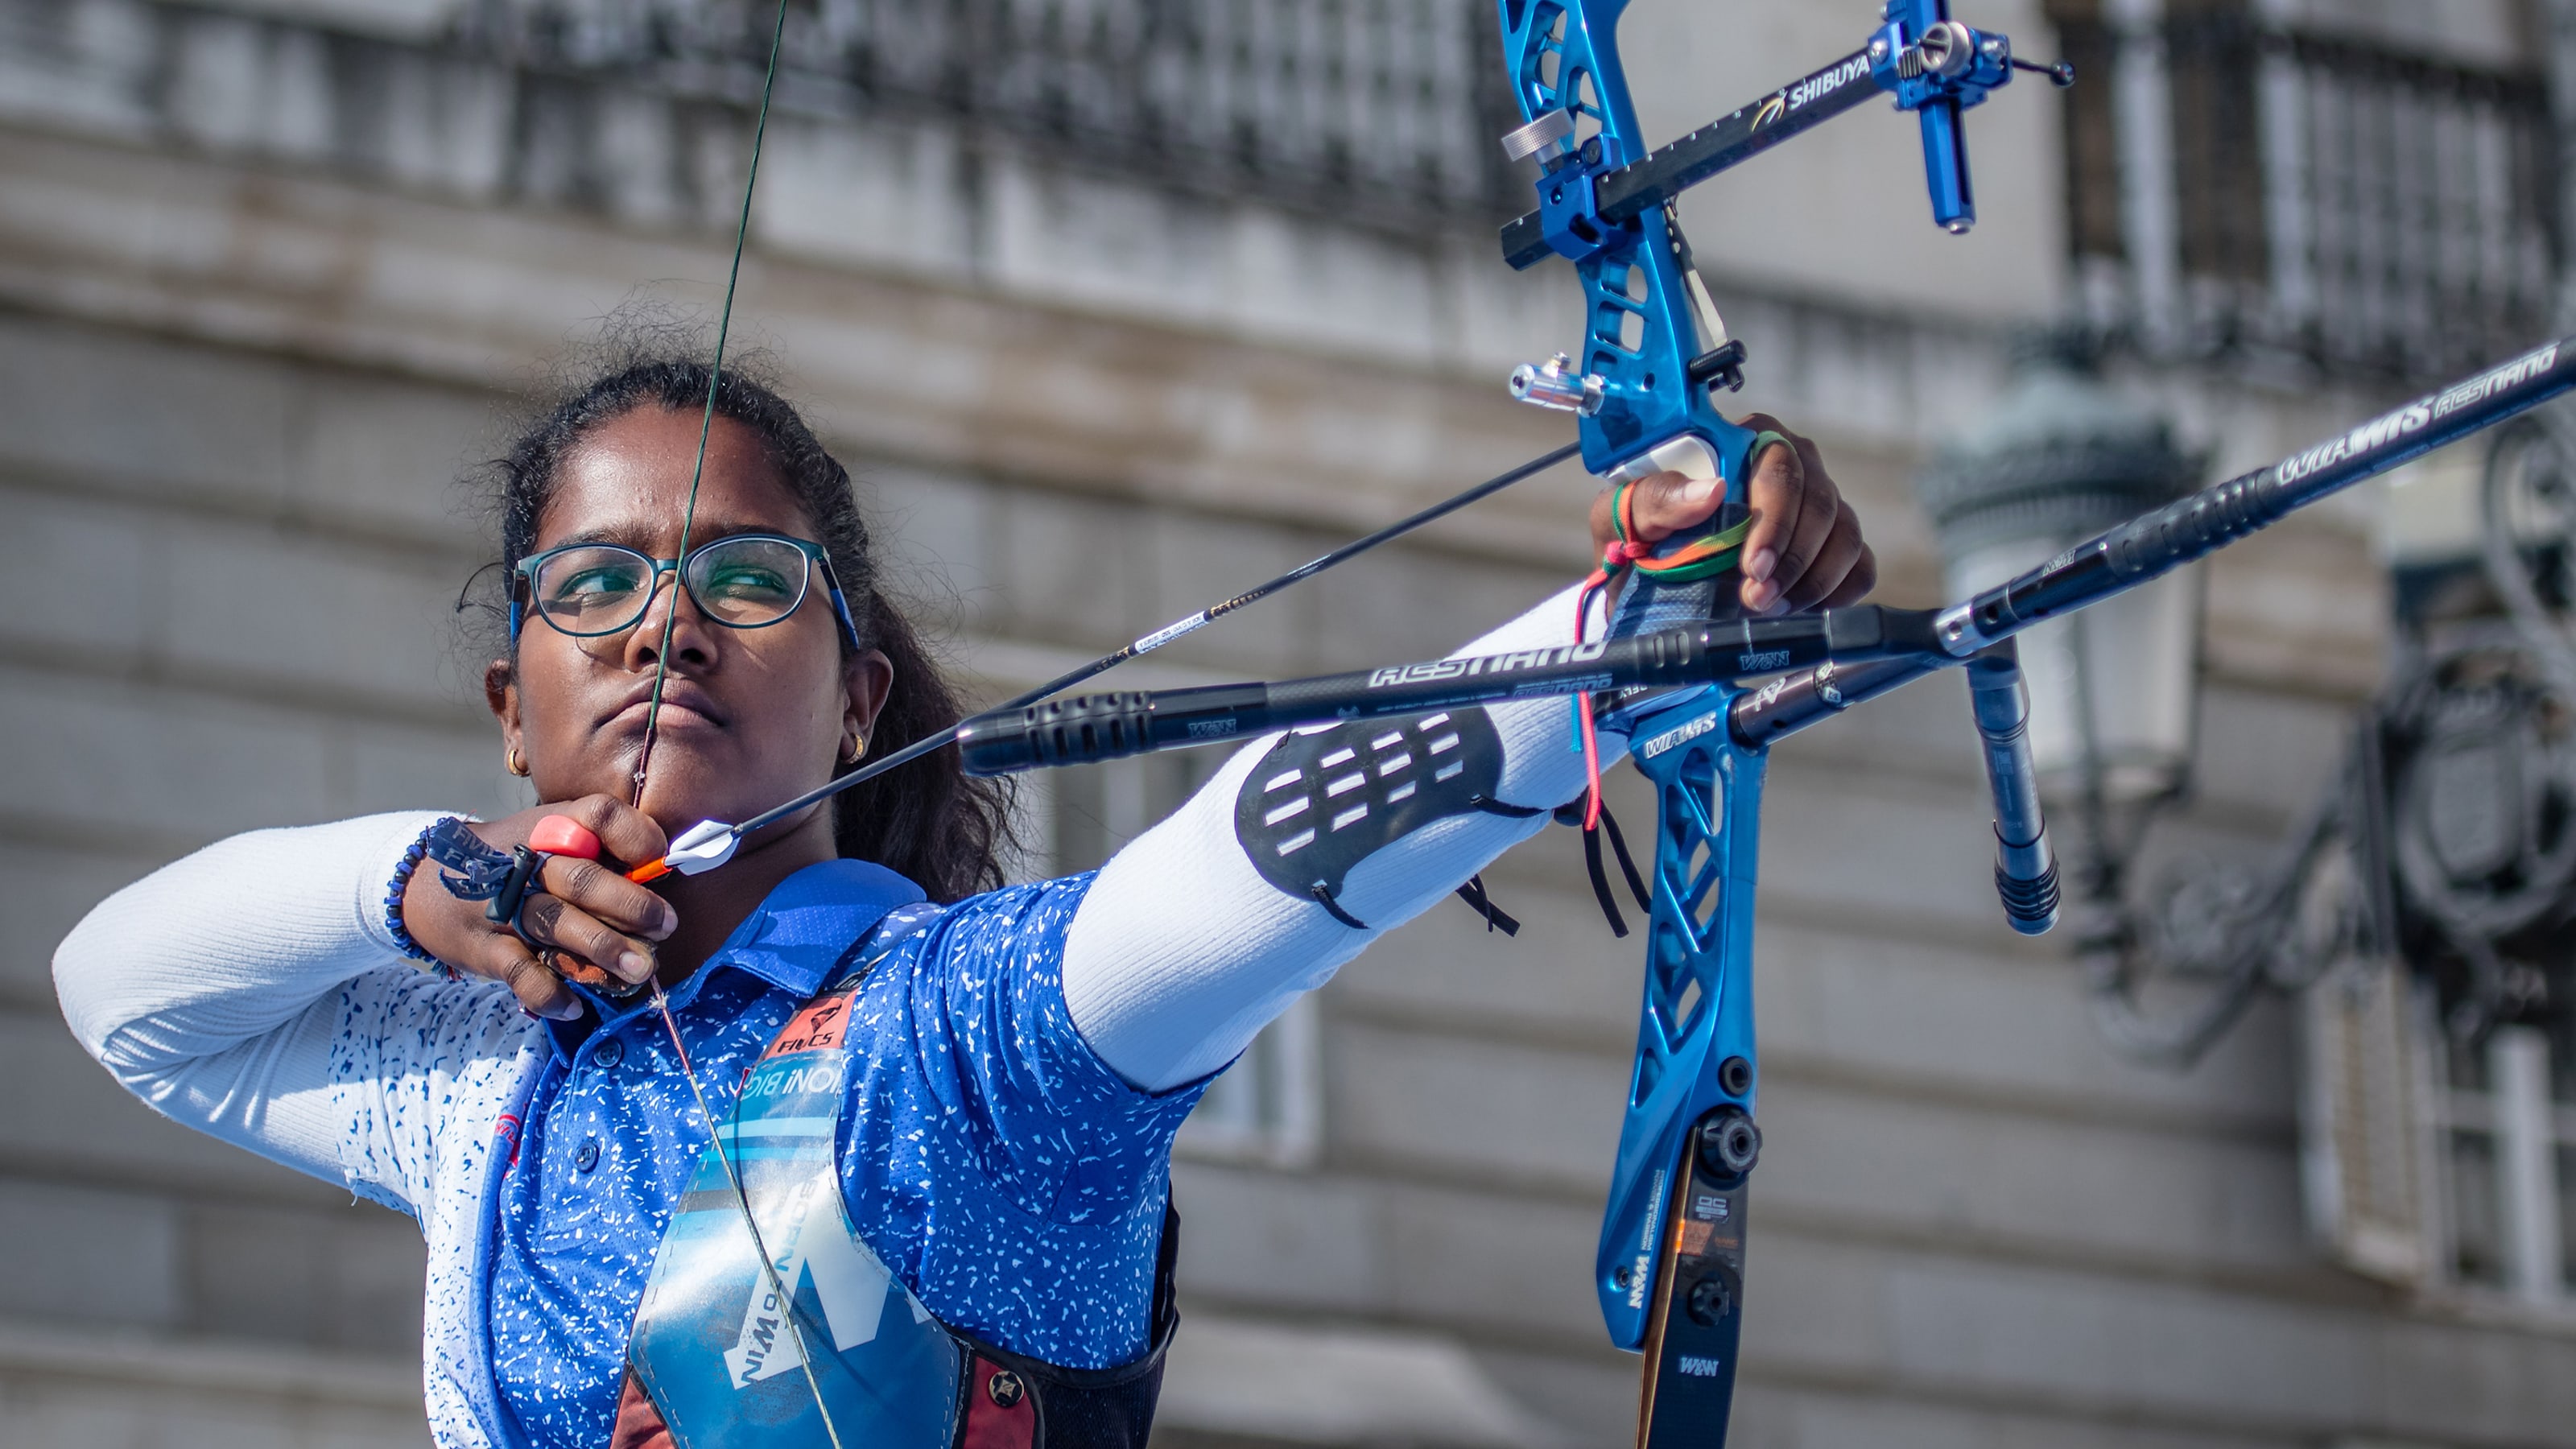 World Archery Championships 21 Know The Schedule And Watch Live Streaming In India